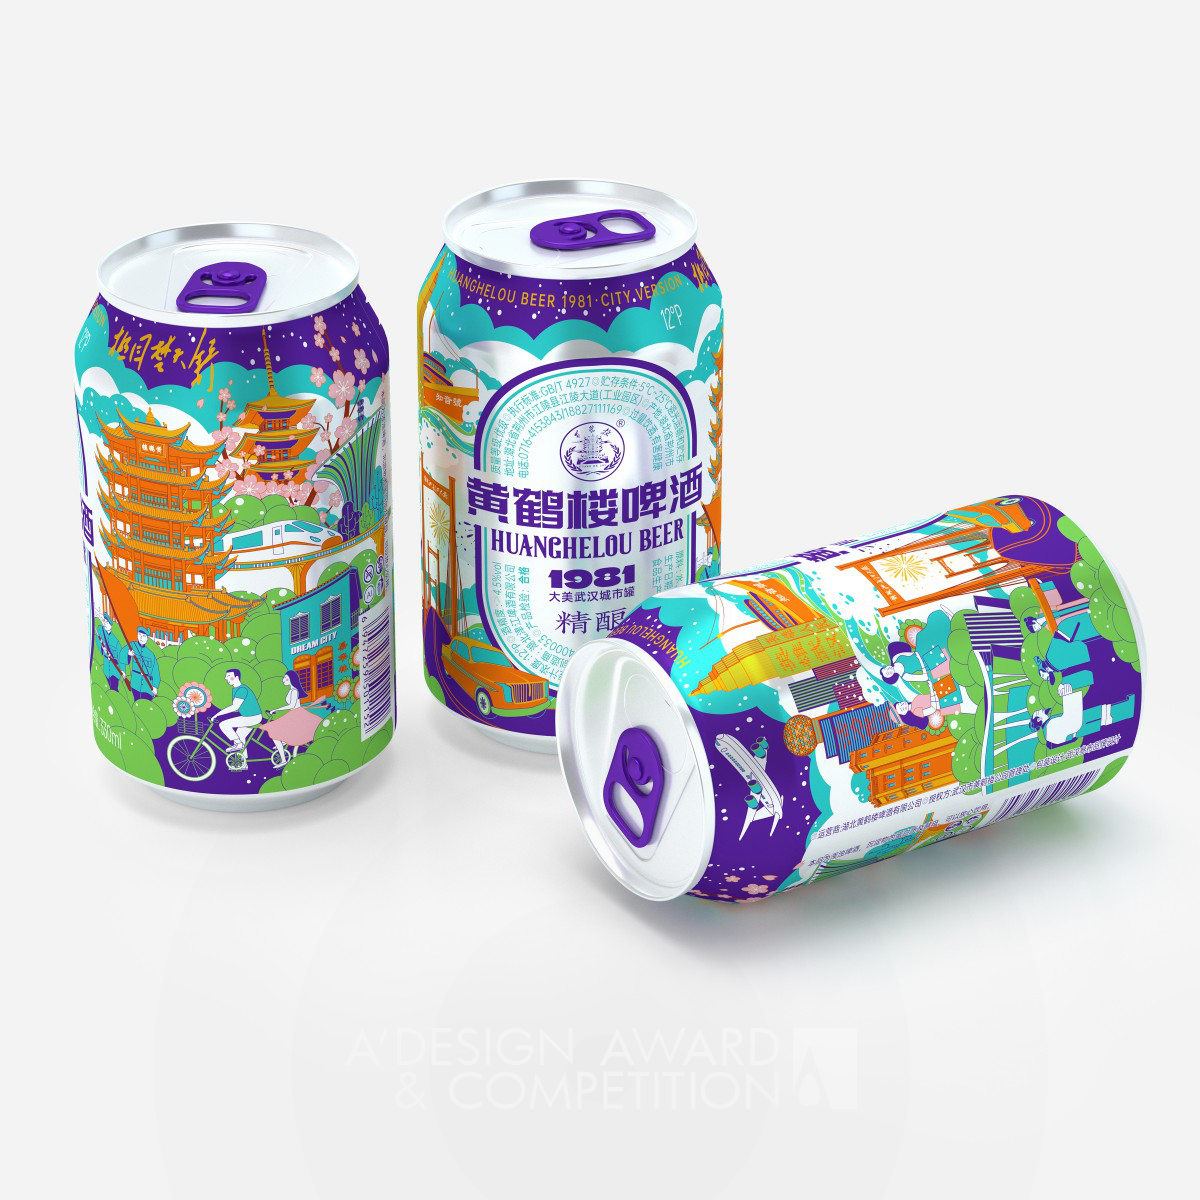 Jin Zhang wins Bronze at the prestigious A' Packaging Design Award with Huanghelou Beer Packaging.